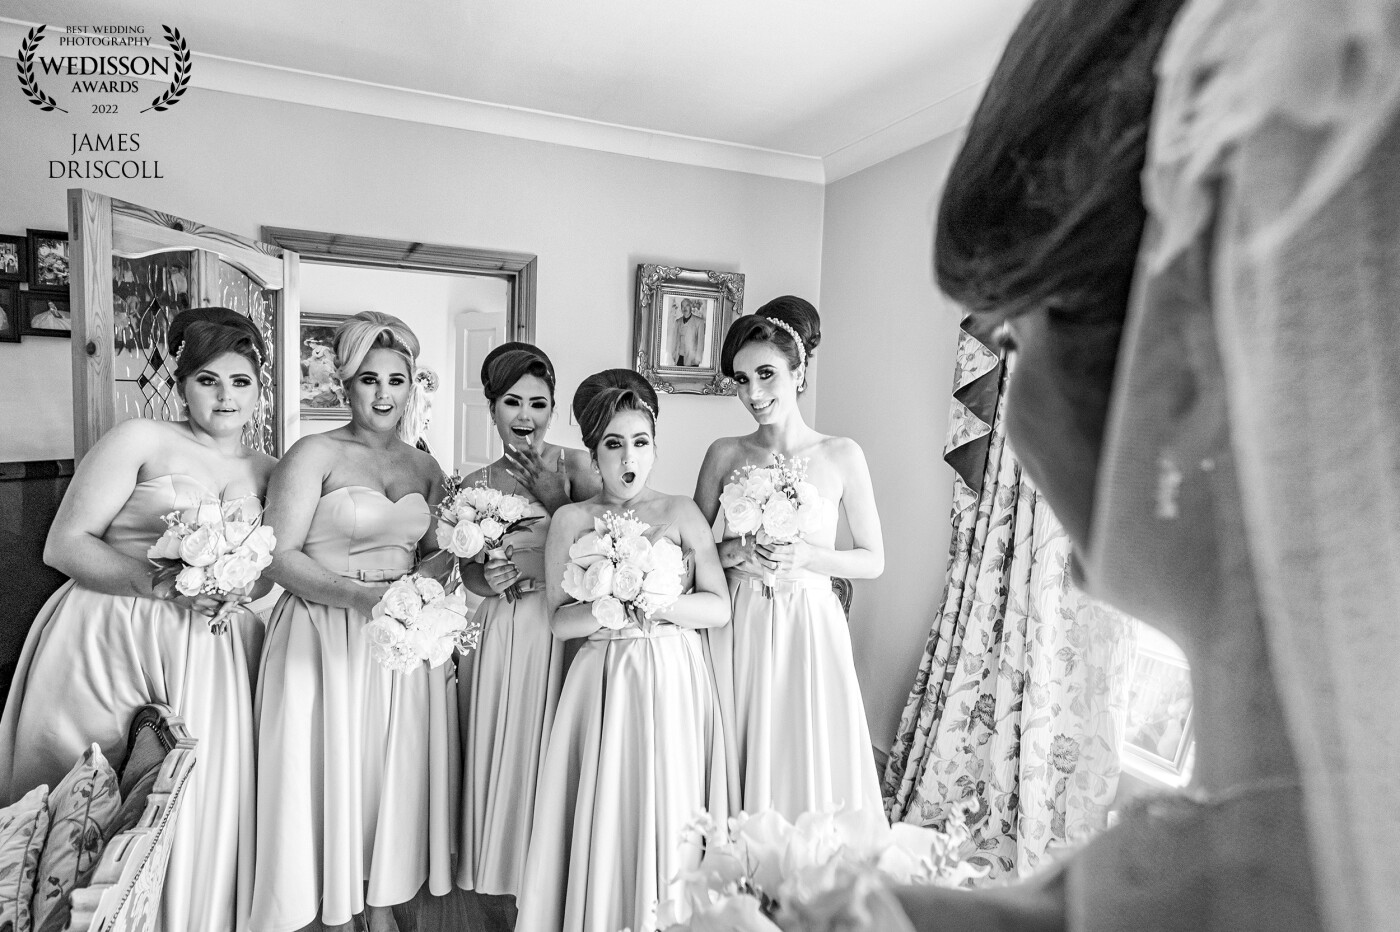 Emma had planned for her bridesmaid to walk in and she would turn around to surprise them with the wedding dress they had not seen before she turned around at that moment. Quick fire and 5 shots later somewhere in the burst of the shutter, was this reaction.. and i absolutely love it..